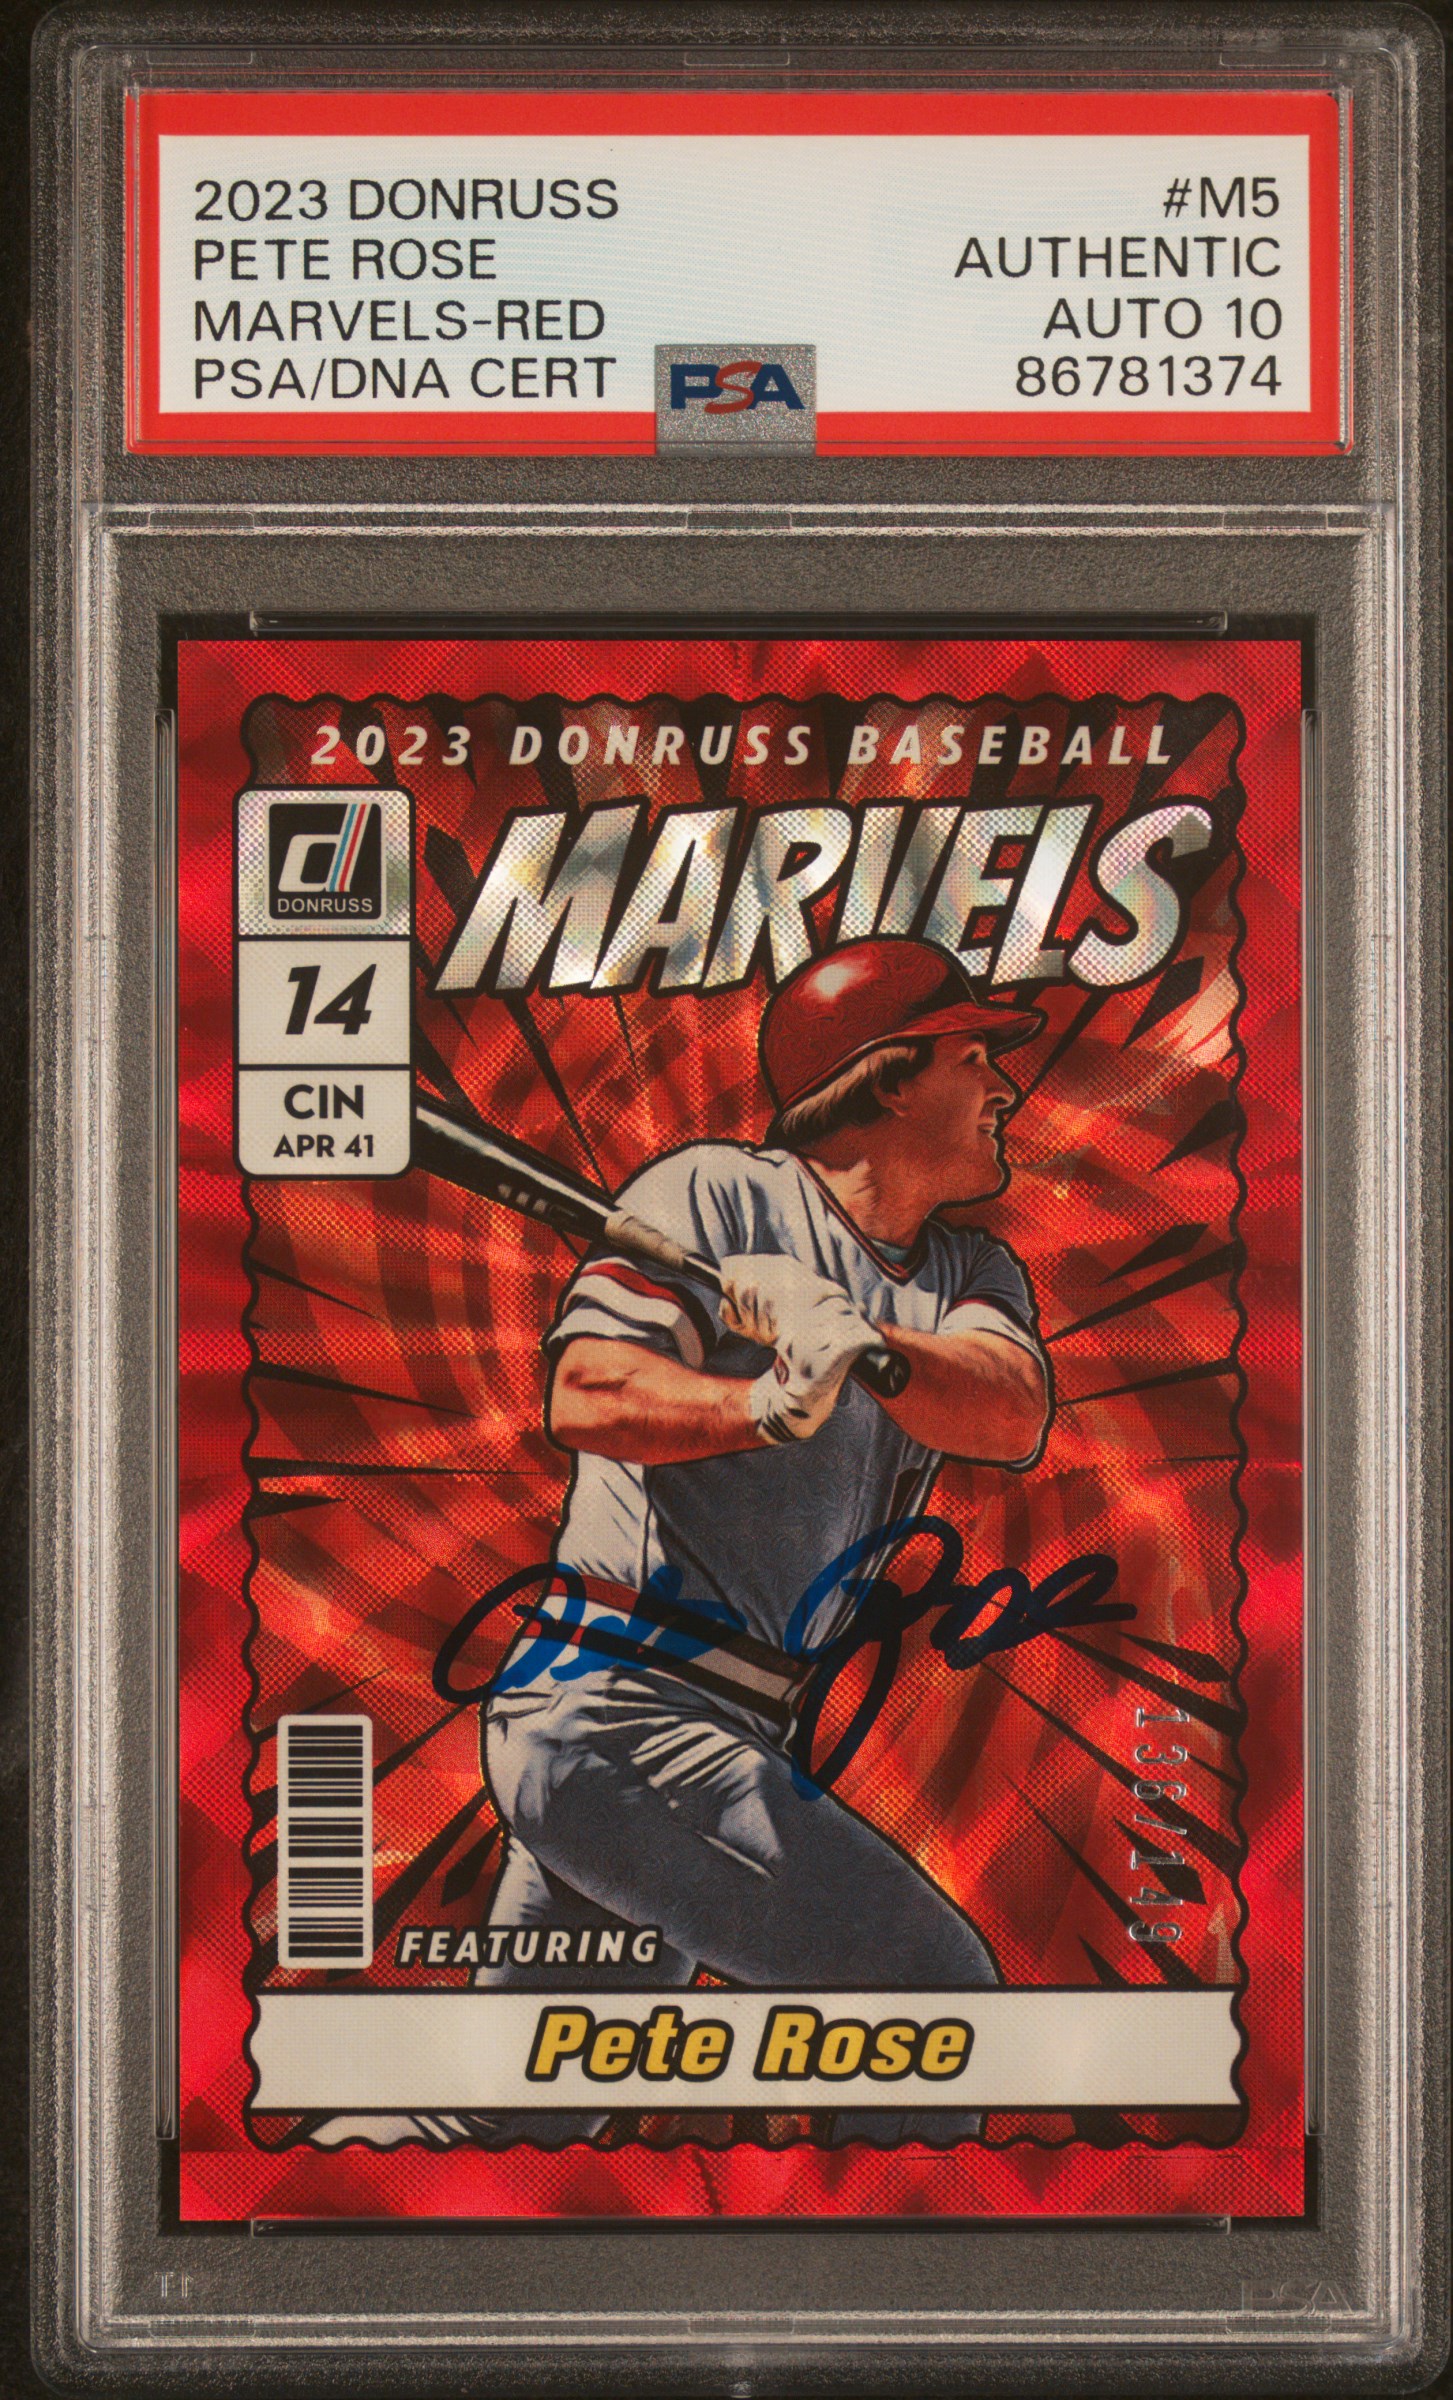 Pete Rose 2023 Donruss Marvels Red Signed Card #M5 Auto Graded PSA 10 136/149